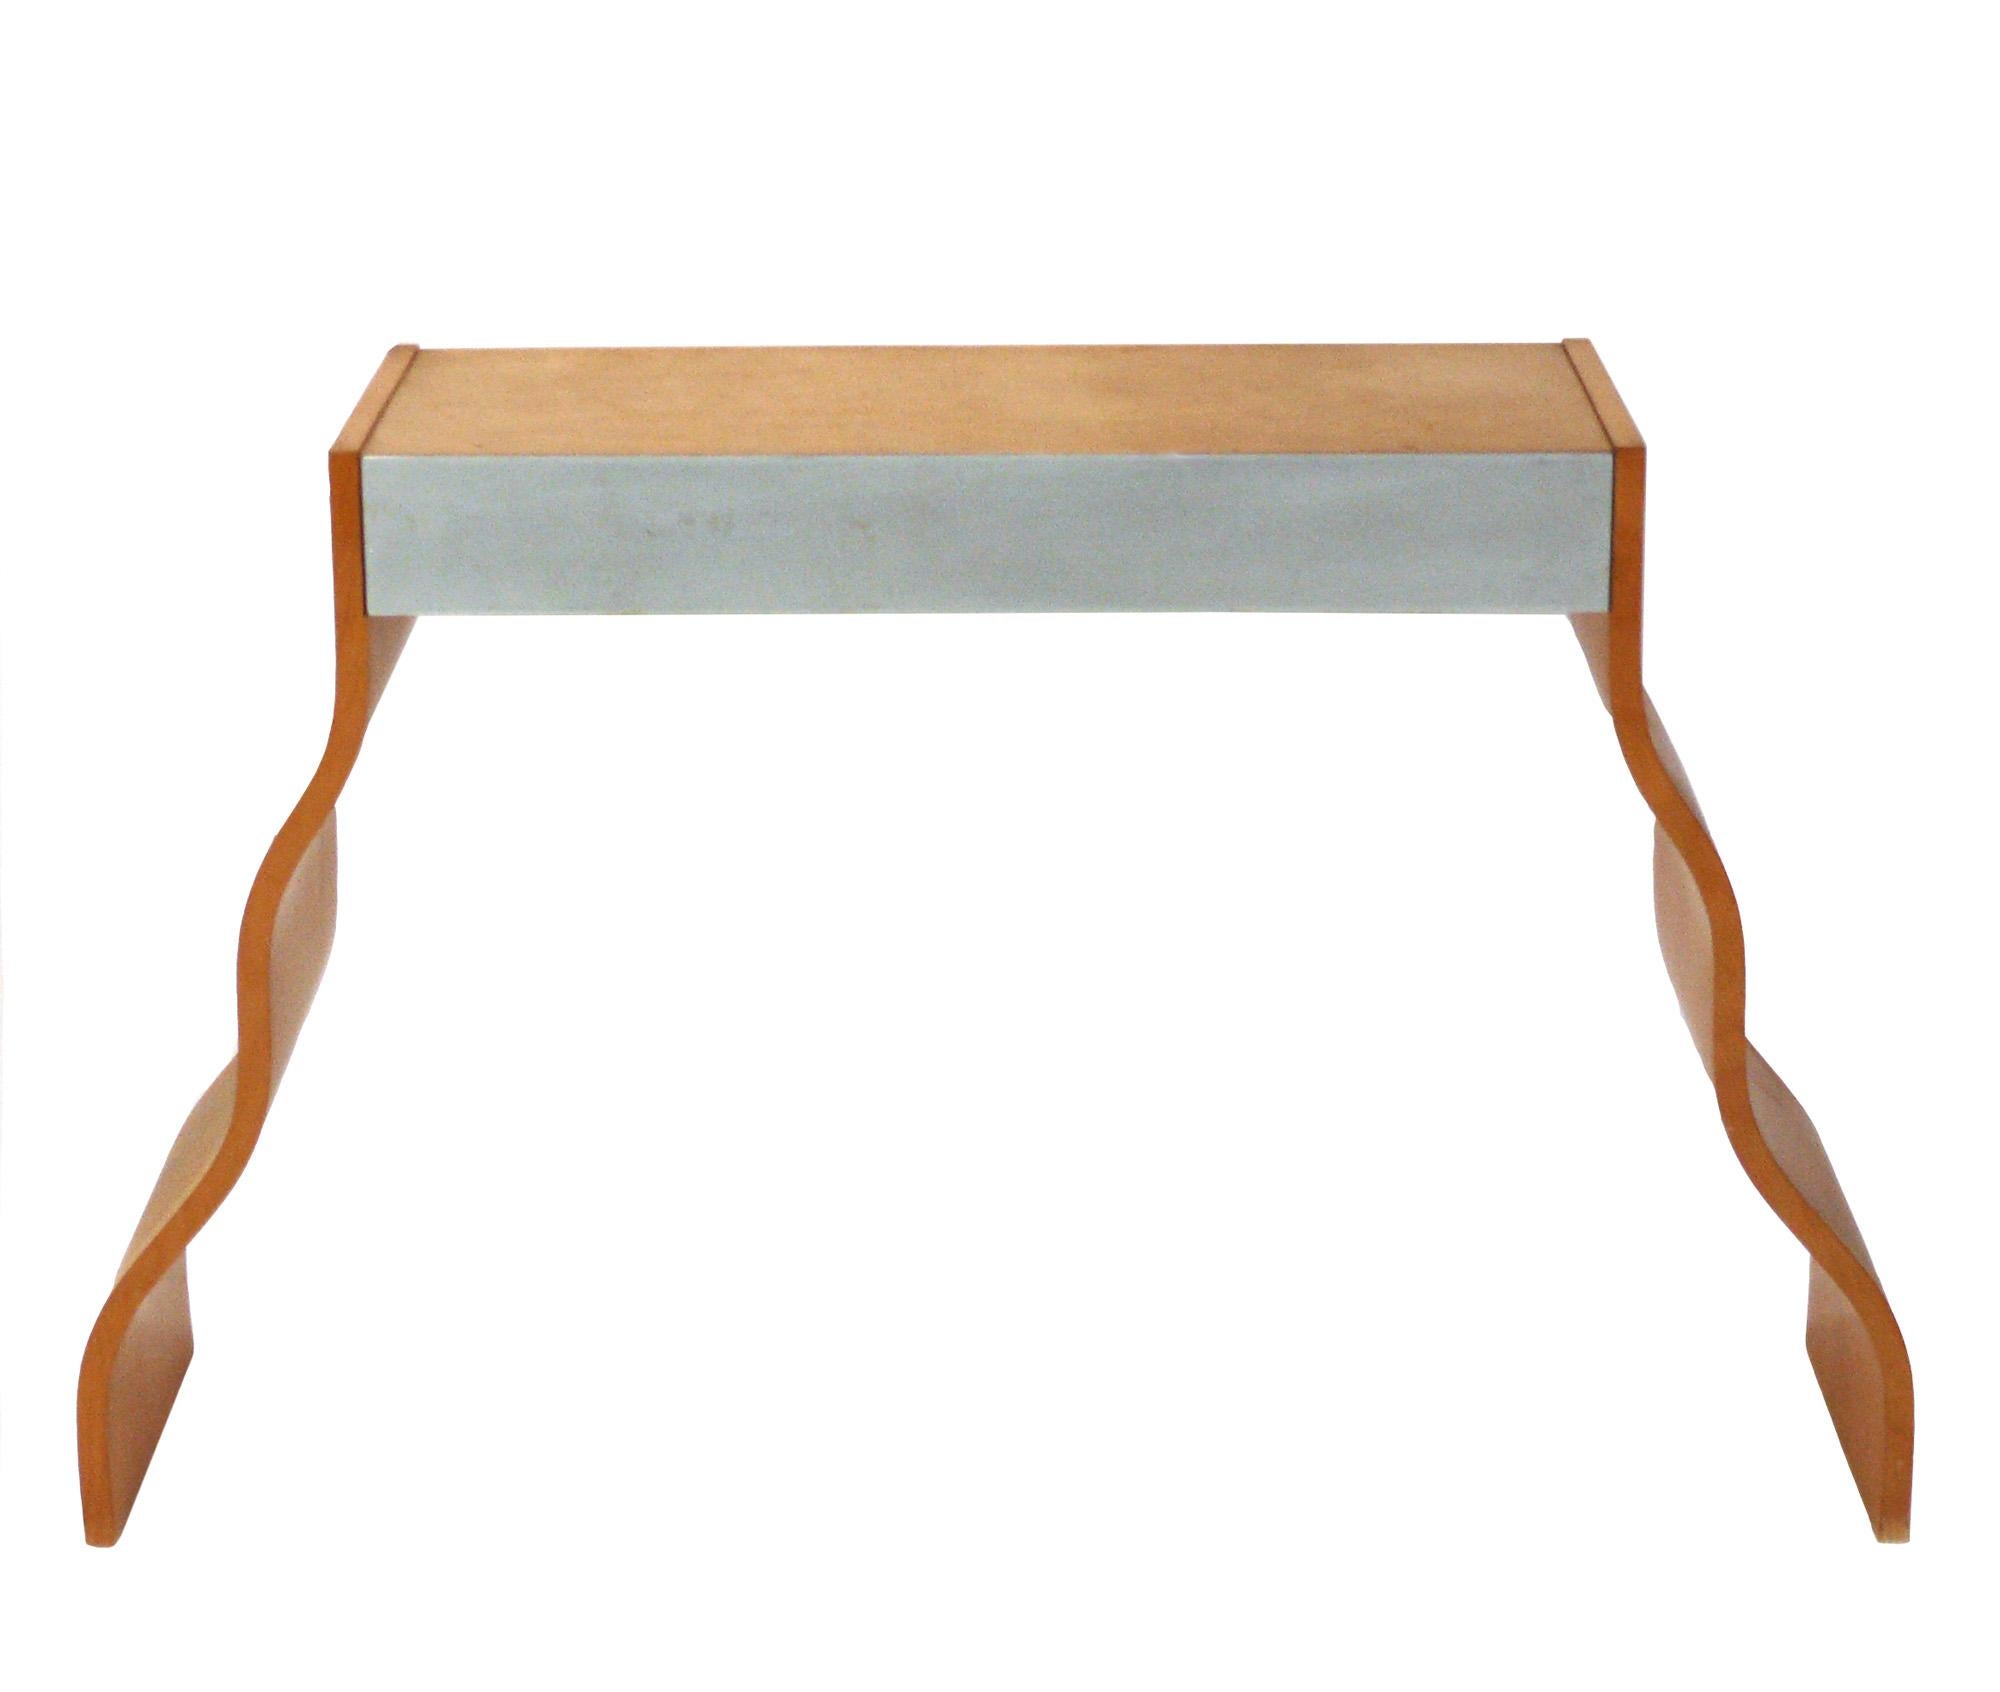 Post modern console table, American, circa 1980s. This sculptural piece is a versatile size, and can be used as a console table, sofa, table, desk, vanity, or bar. It measures 46 inch width at the base, 31.5 inches width at the top.